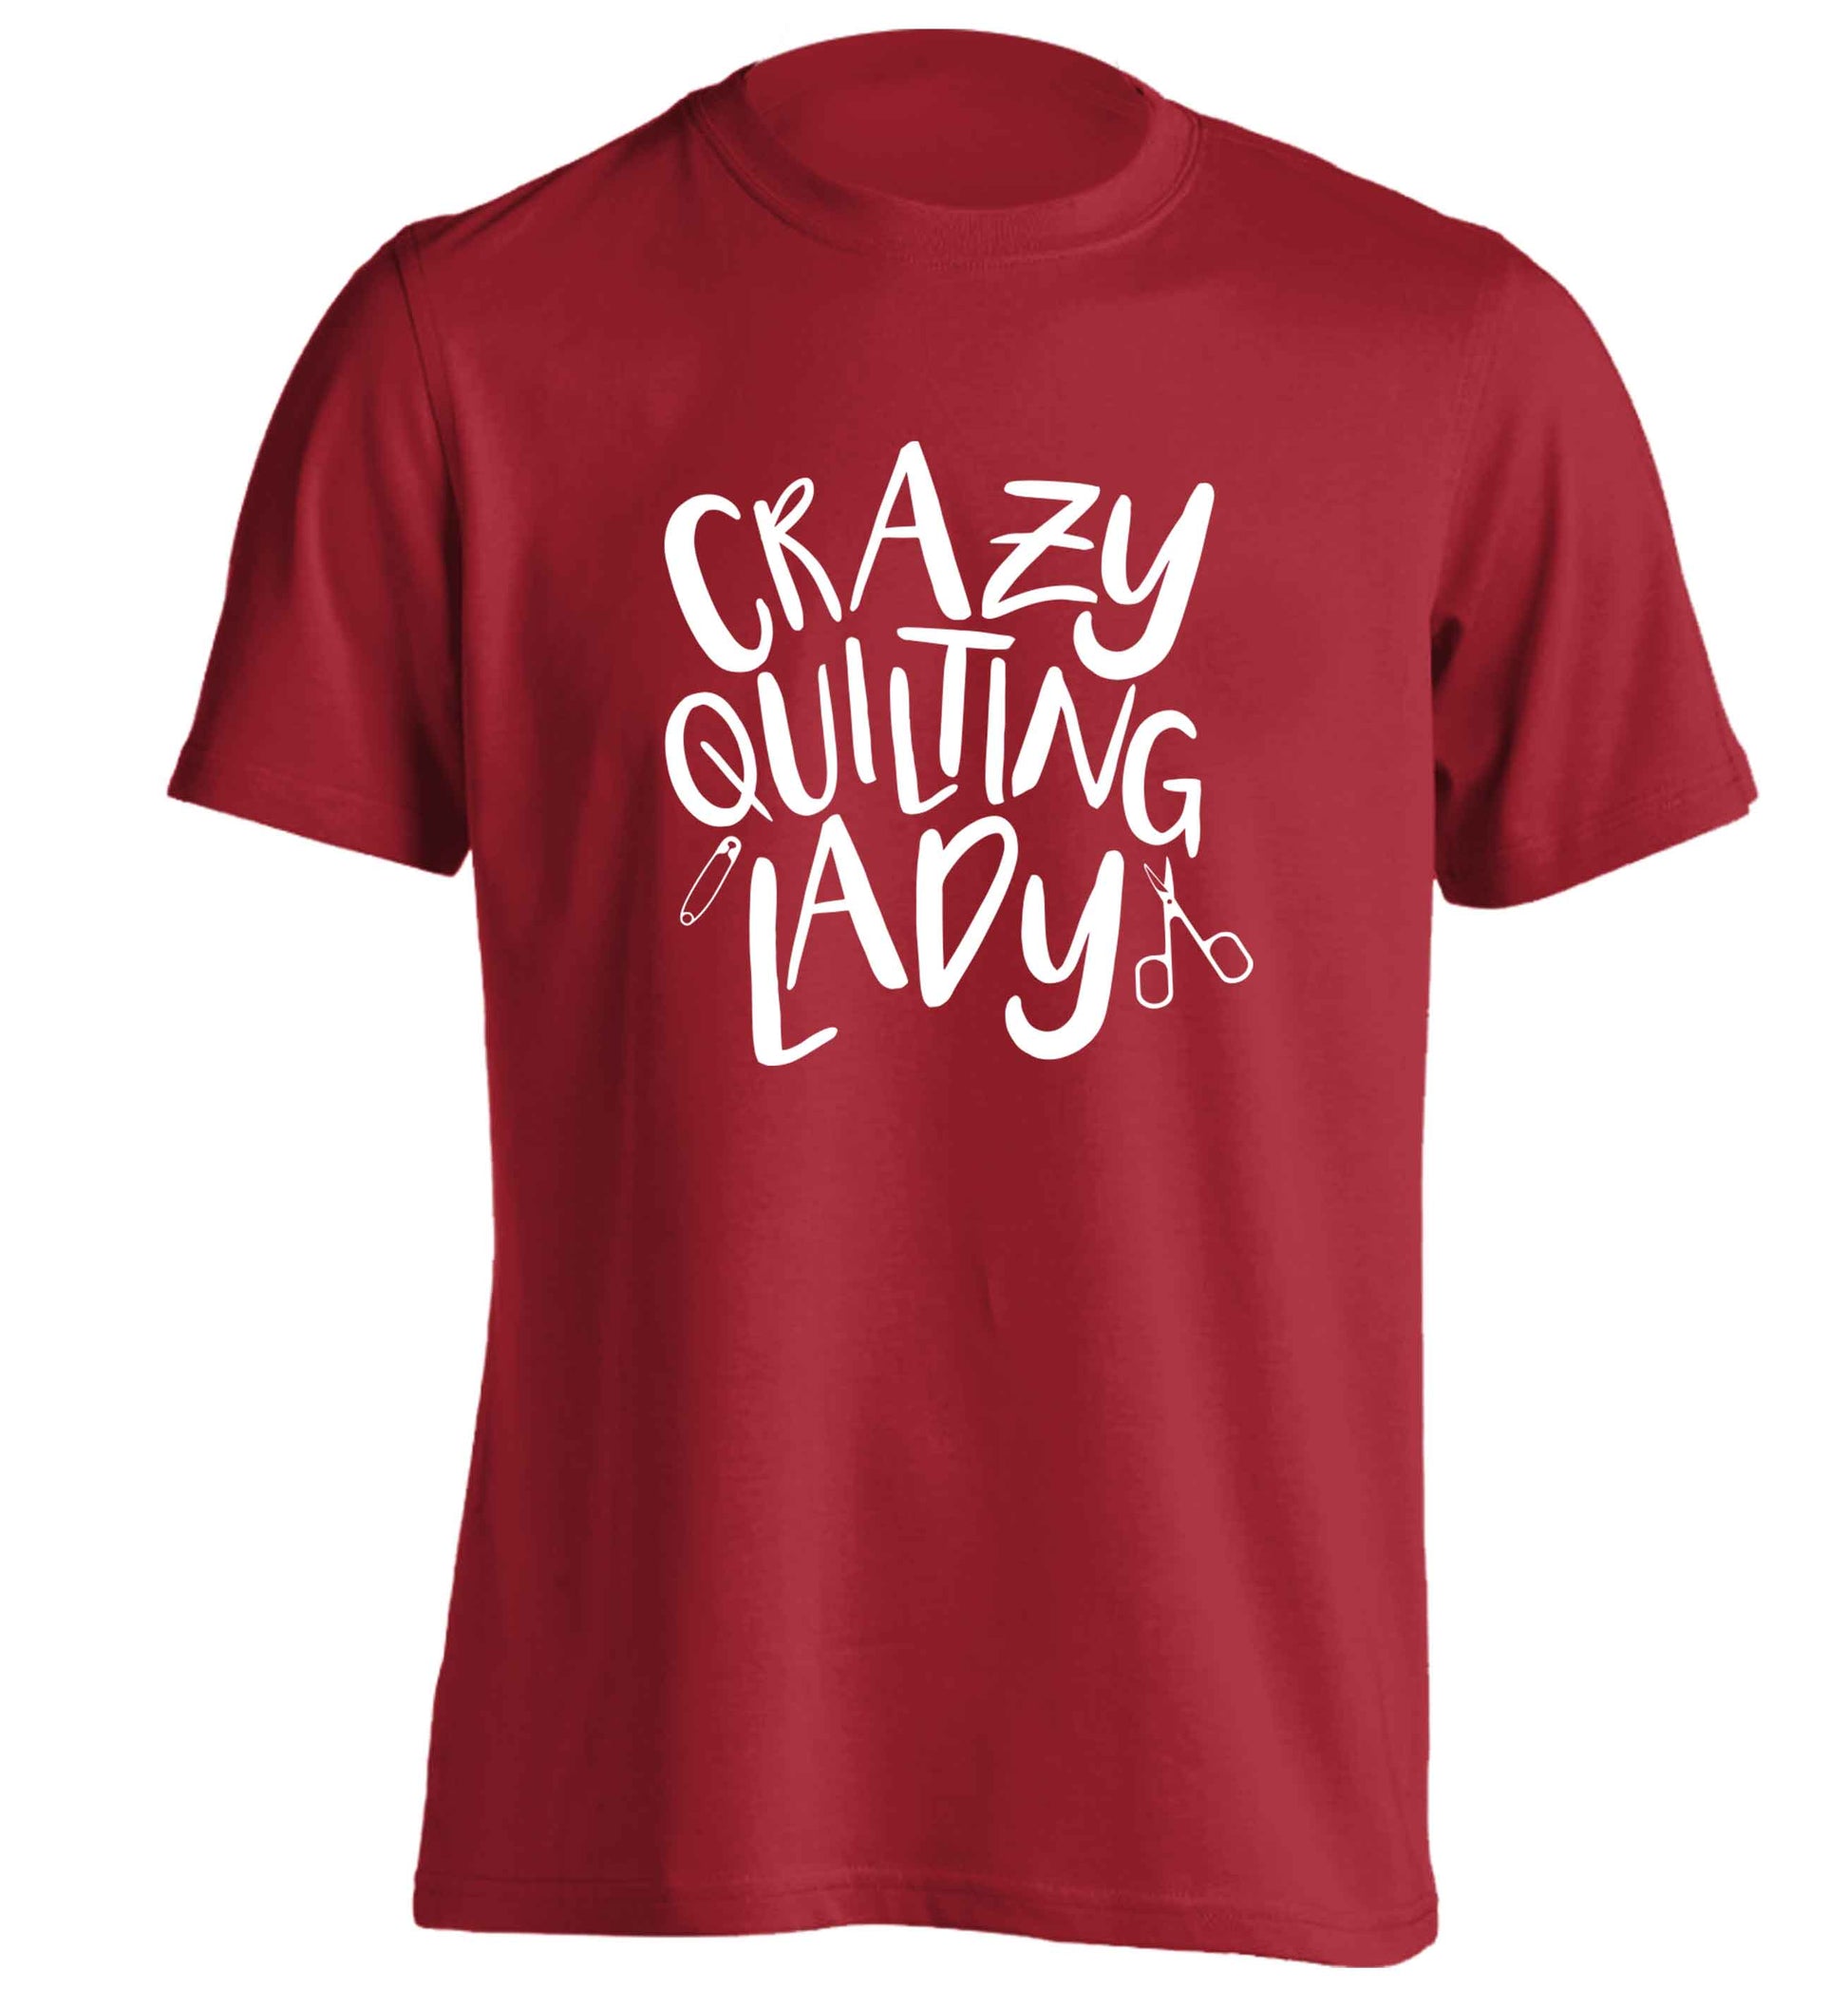 Crazy quilting lady adults unisex red Tshirt 2XL